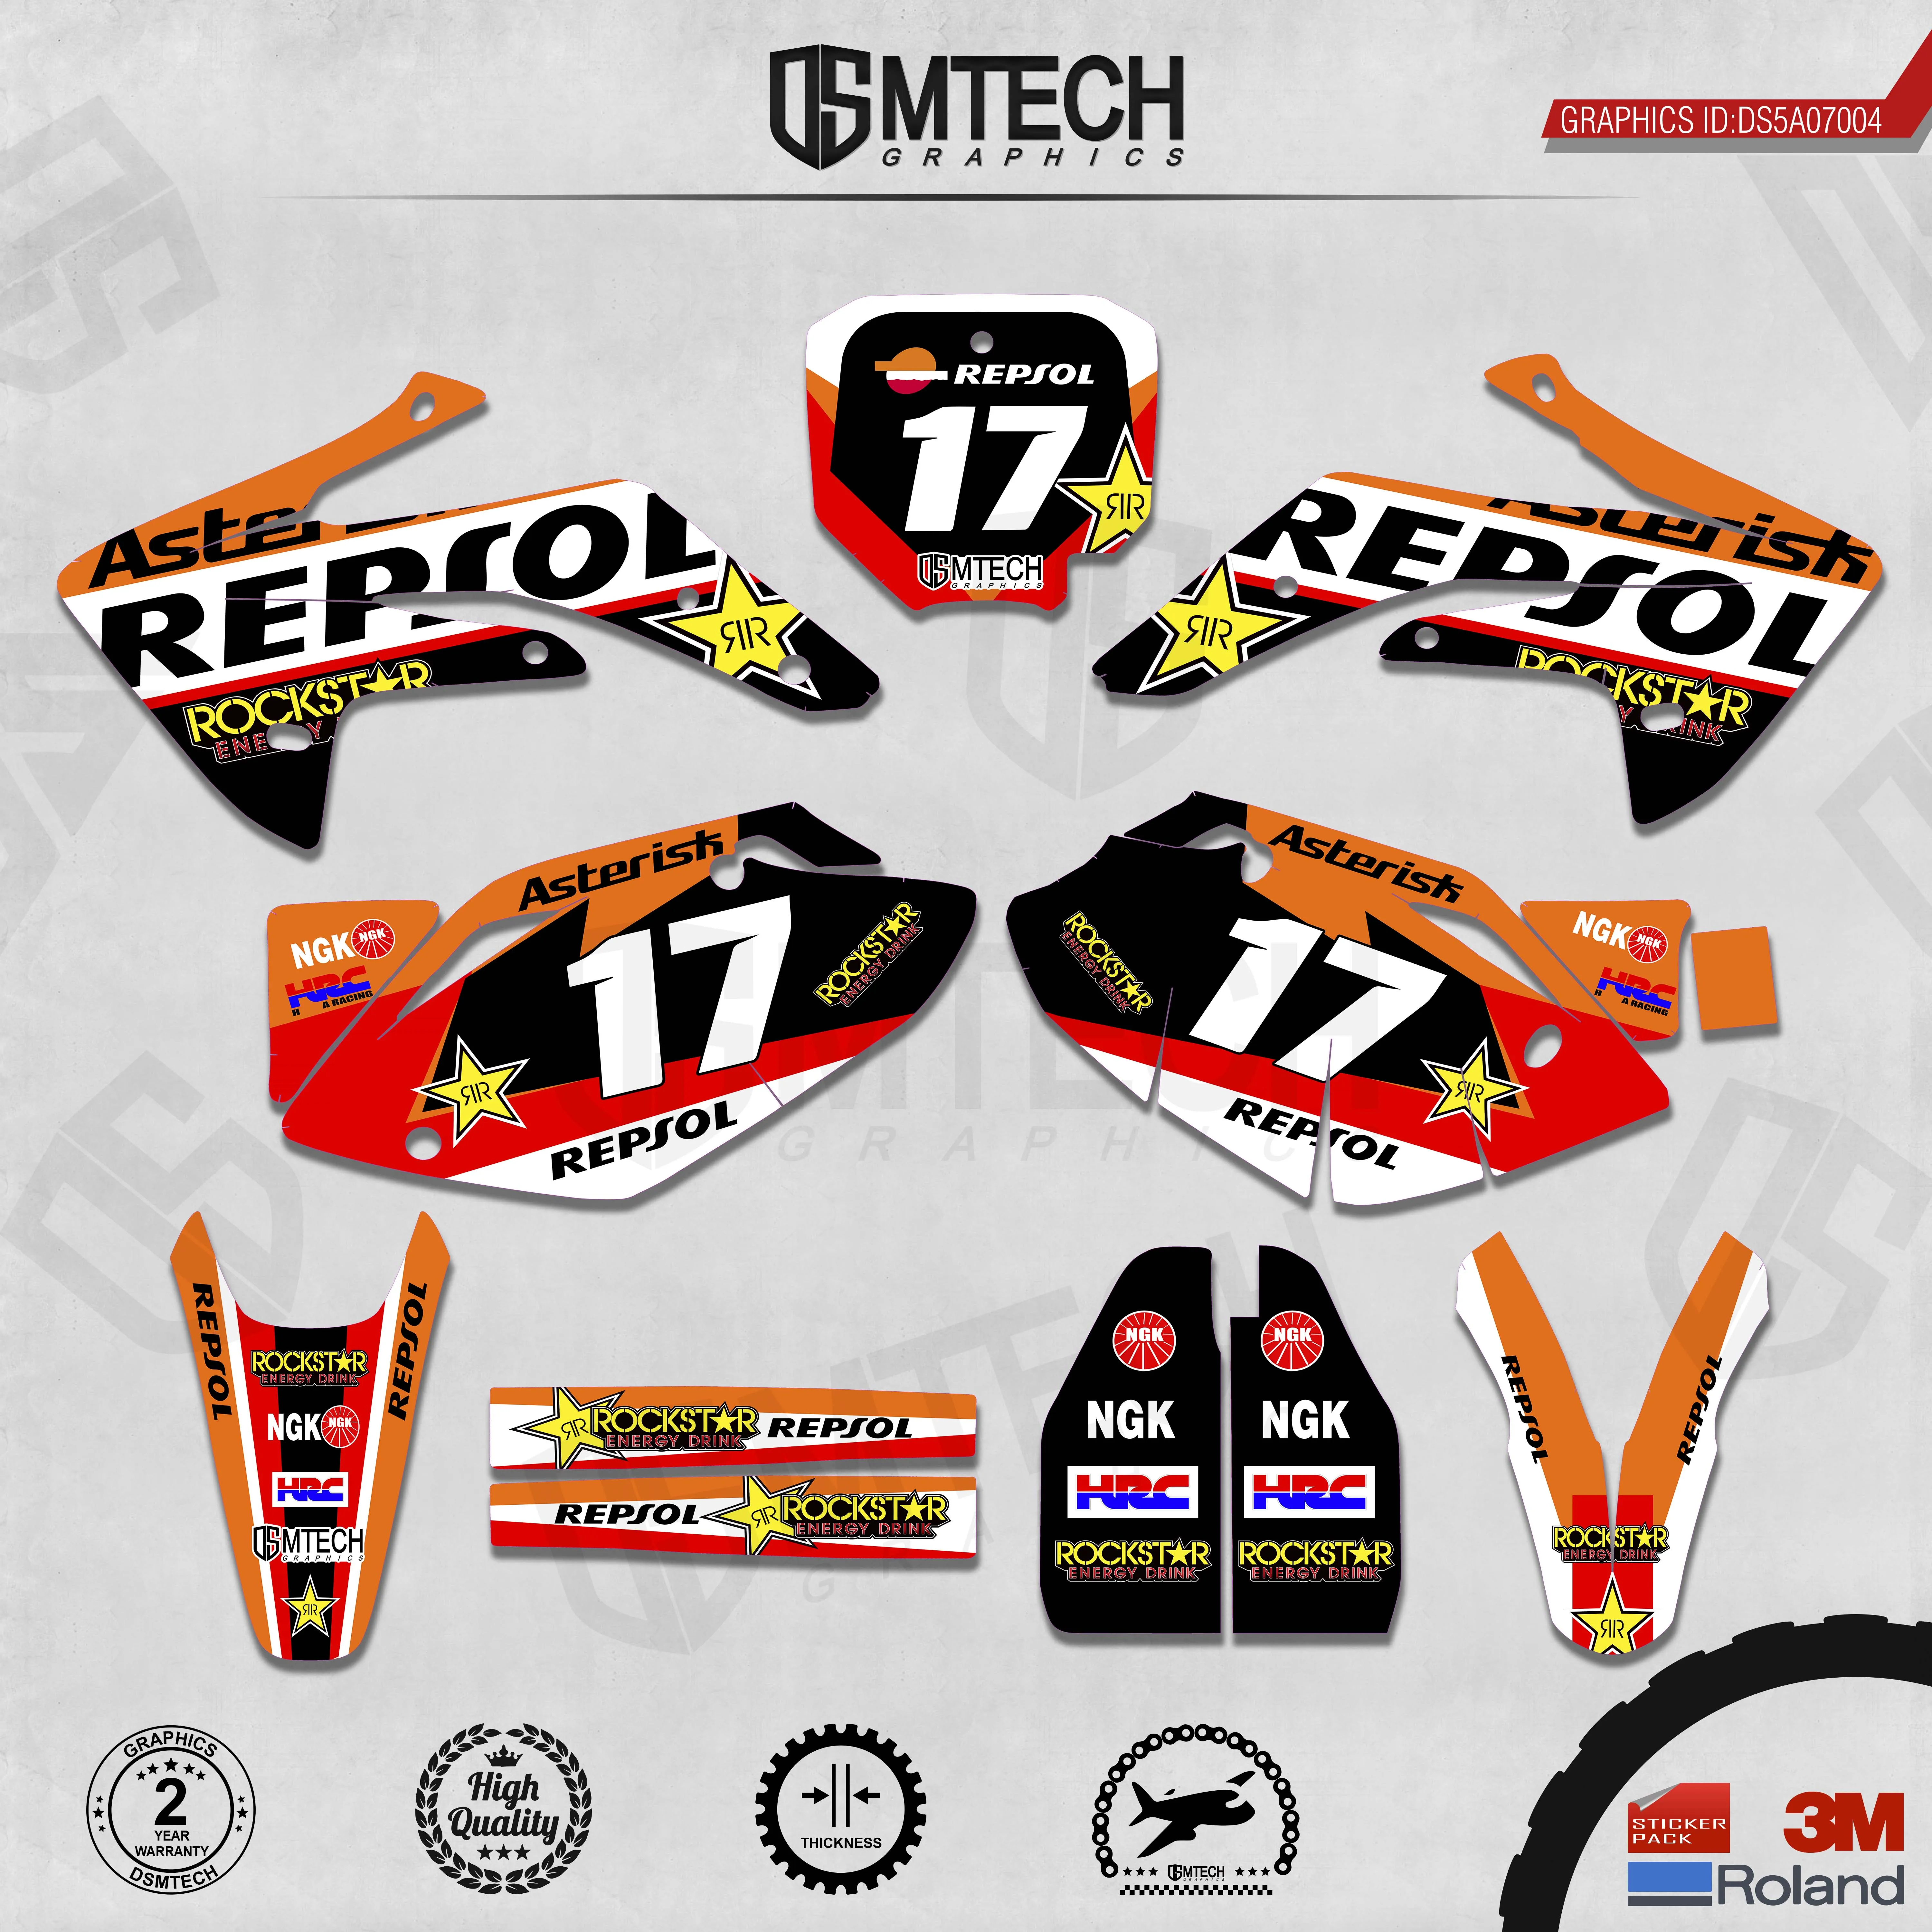 DSMTECH Customized Team Graphics Backgrounds Decals 3M Custom Stickers For 2007-2009 2010-2012 2013-2015 2016-2020 CRF150R 004